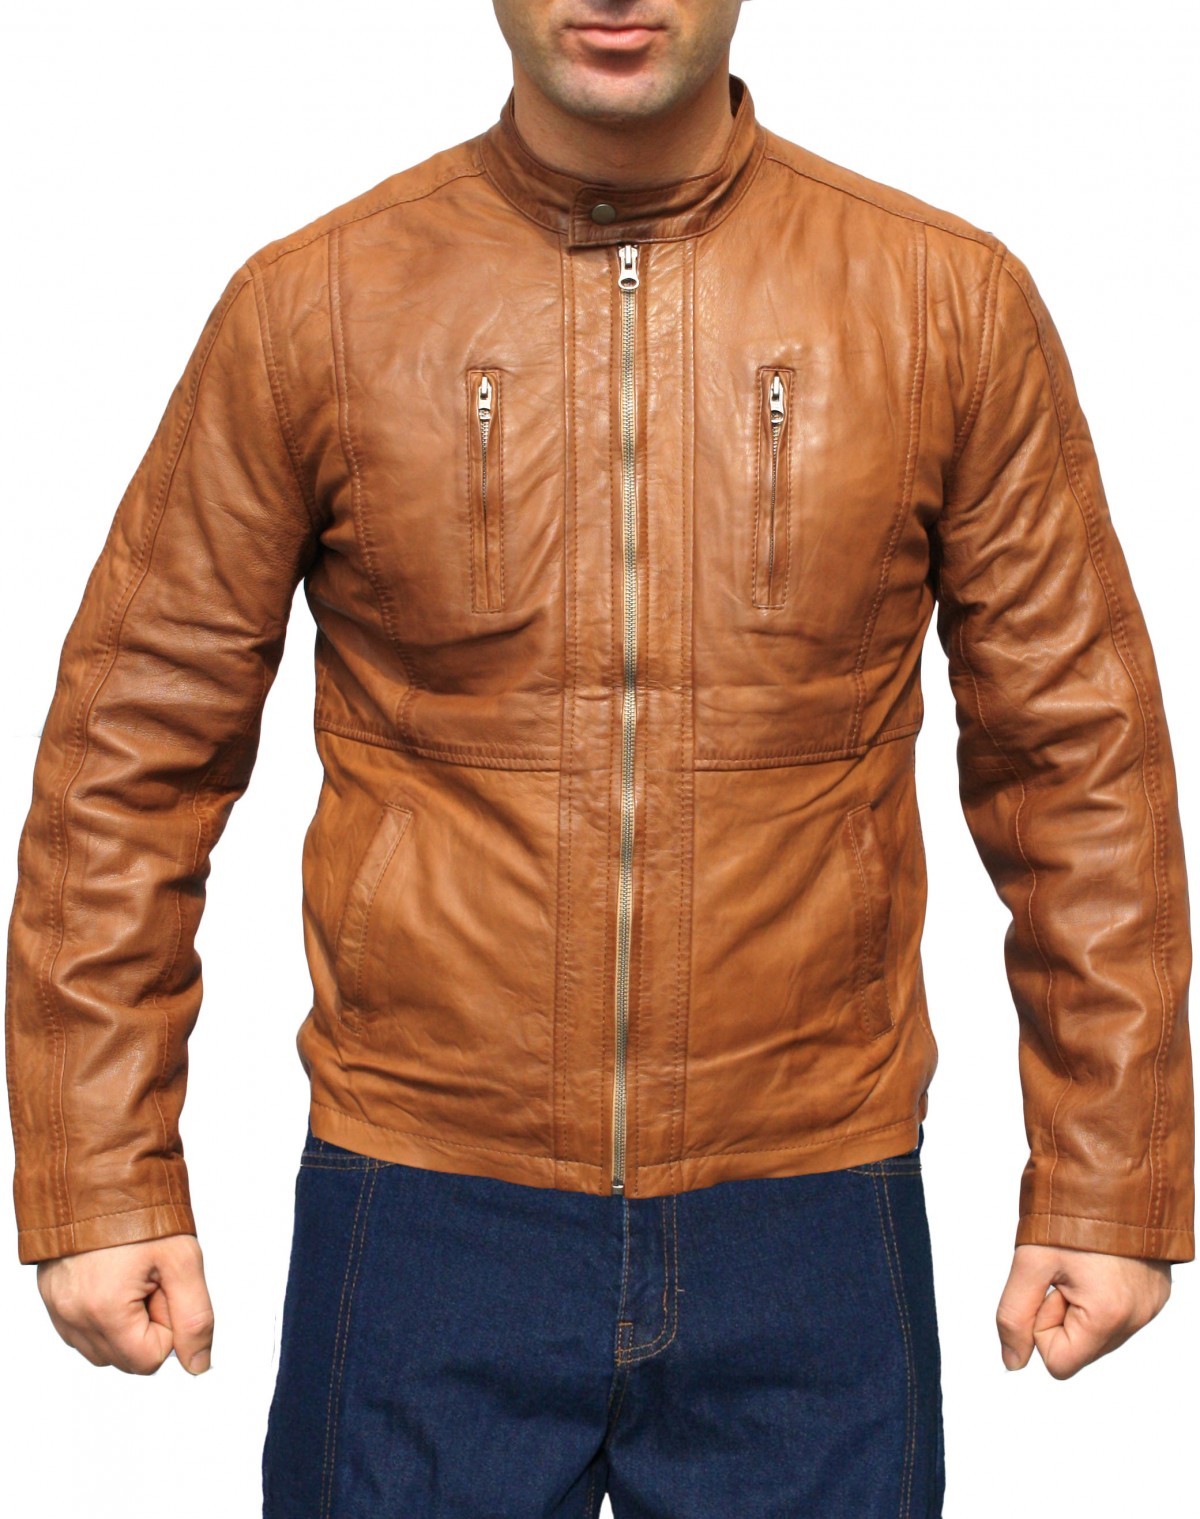 Men Leather Jacket, Fashion Sheep Skin Lamb Nappa-Leather,Color: Brown